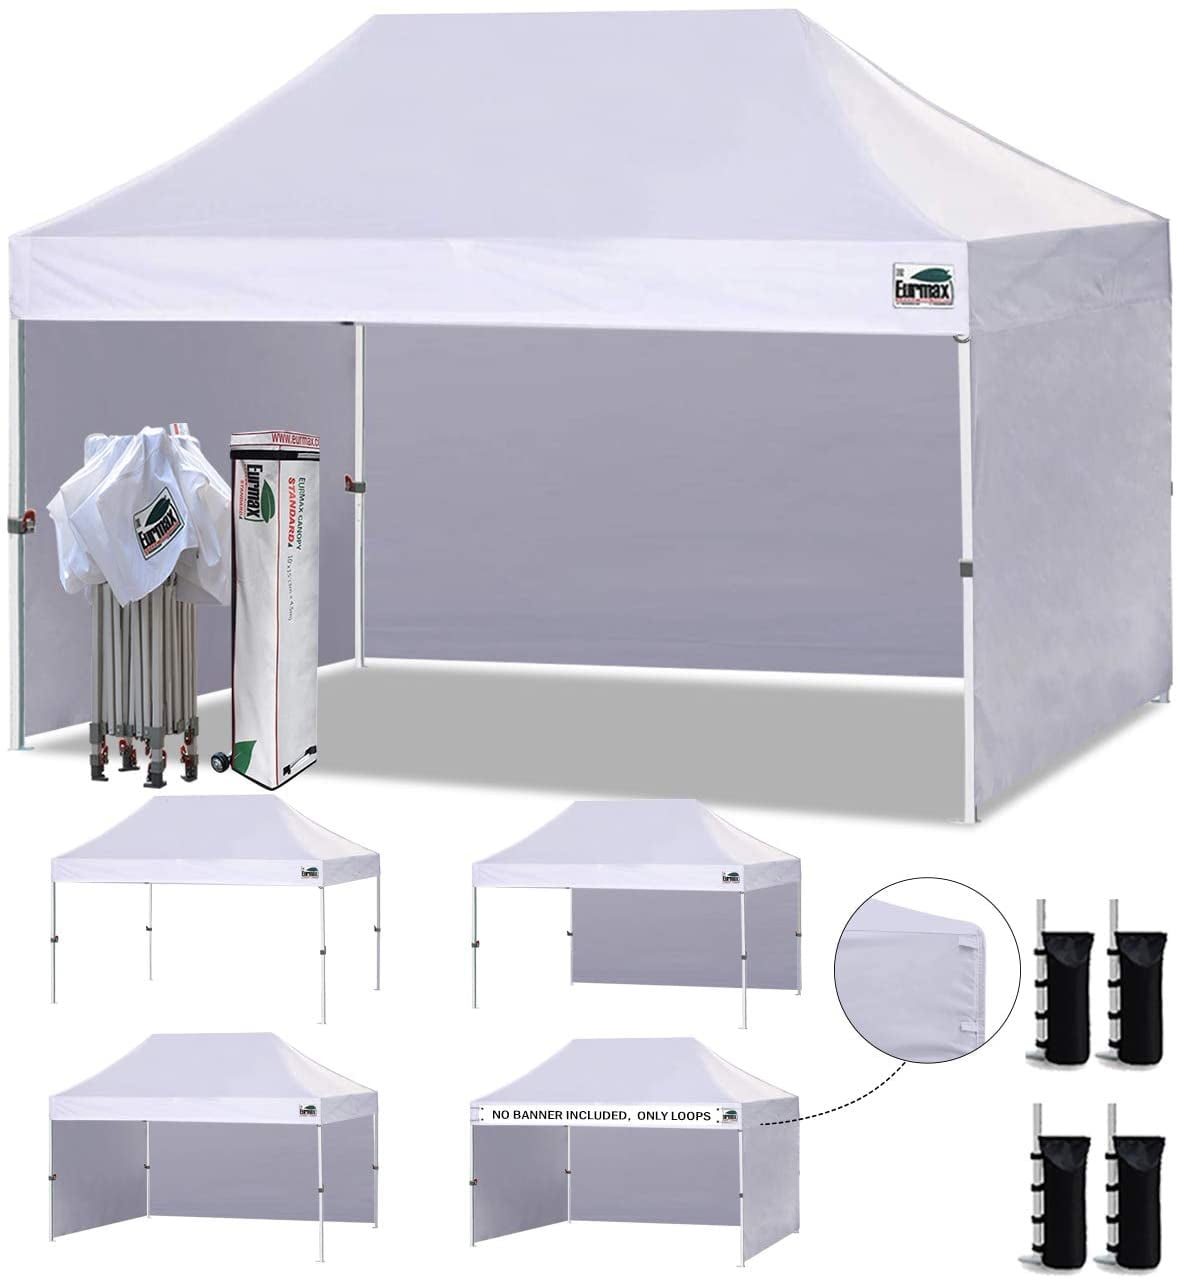 Bonus 4 SandBags MASTERCANOPY Pop-up Canopy Tent Compact Instant Canopies with 4 Removable Side Walls and Roller Bag 8x8 FT, Beige